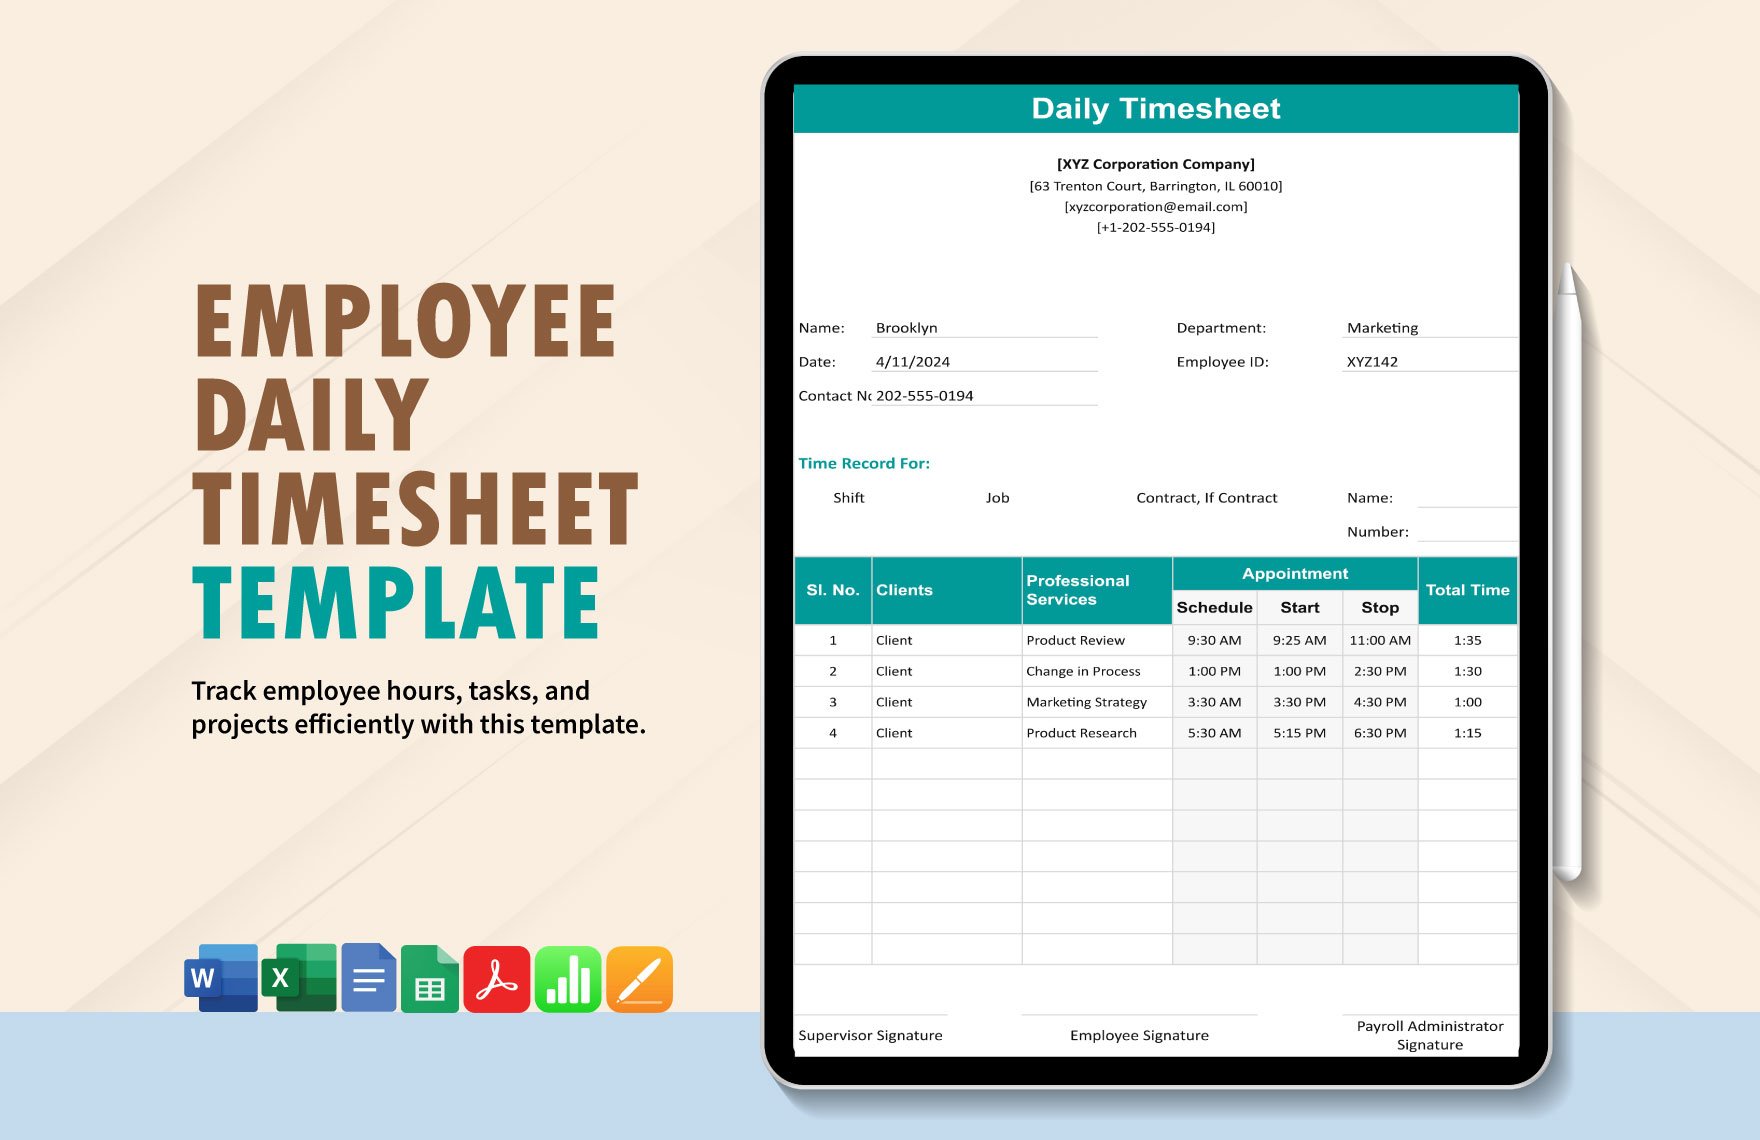 Employee Daily Timesheet Template in Word, Google Docs, Excel, PDF, Google Sheets, Apple Pages, Apple Numbers